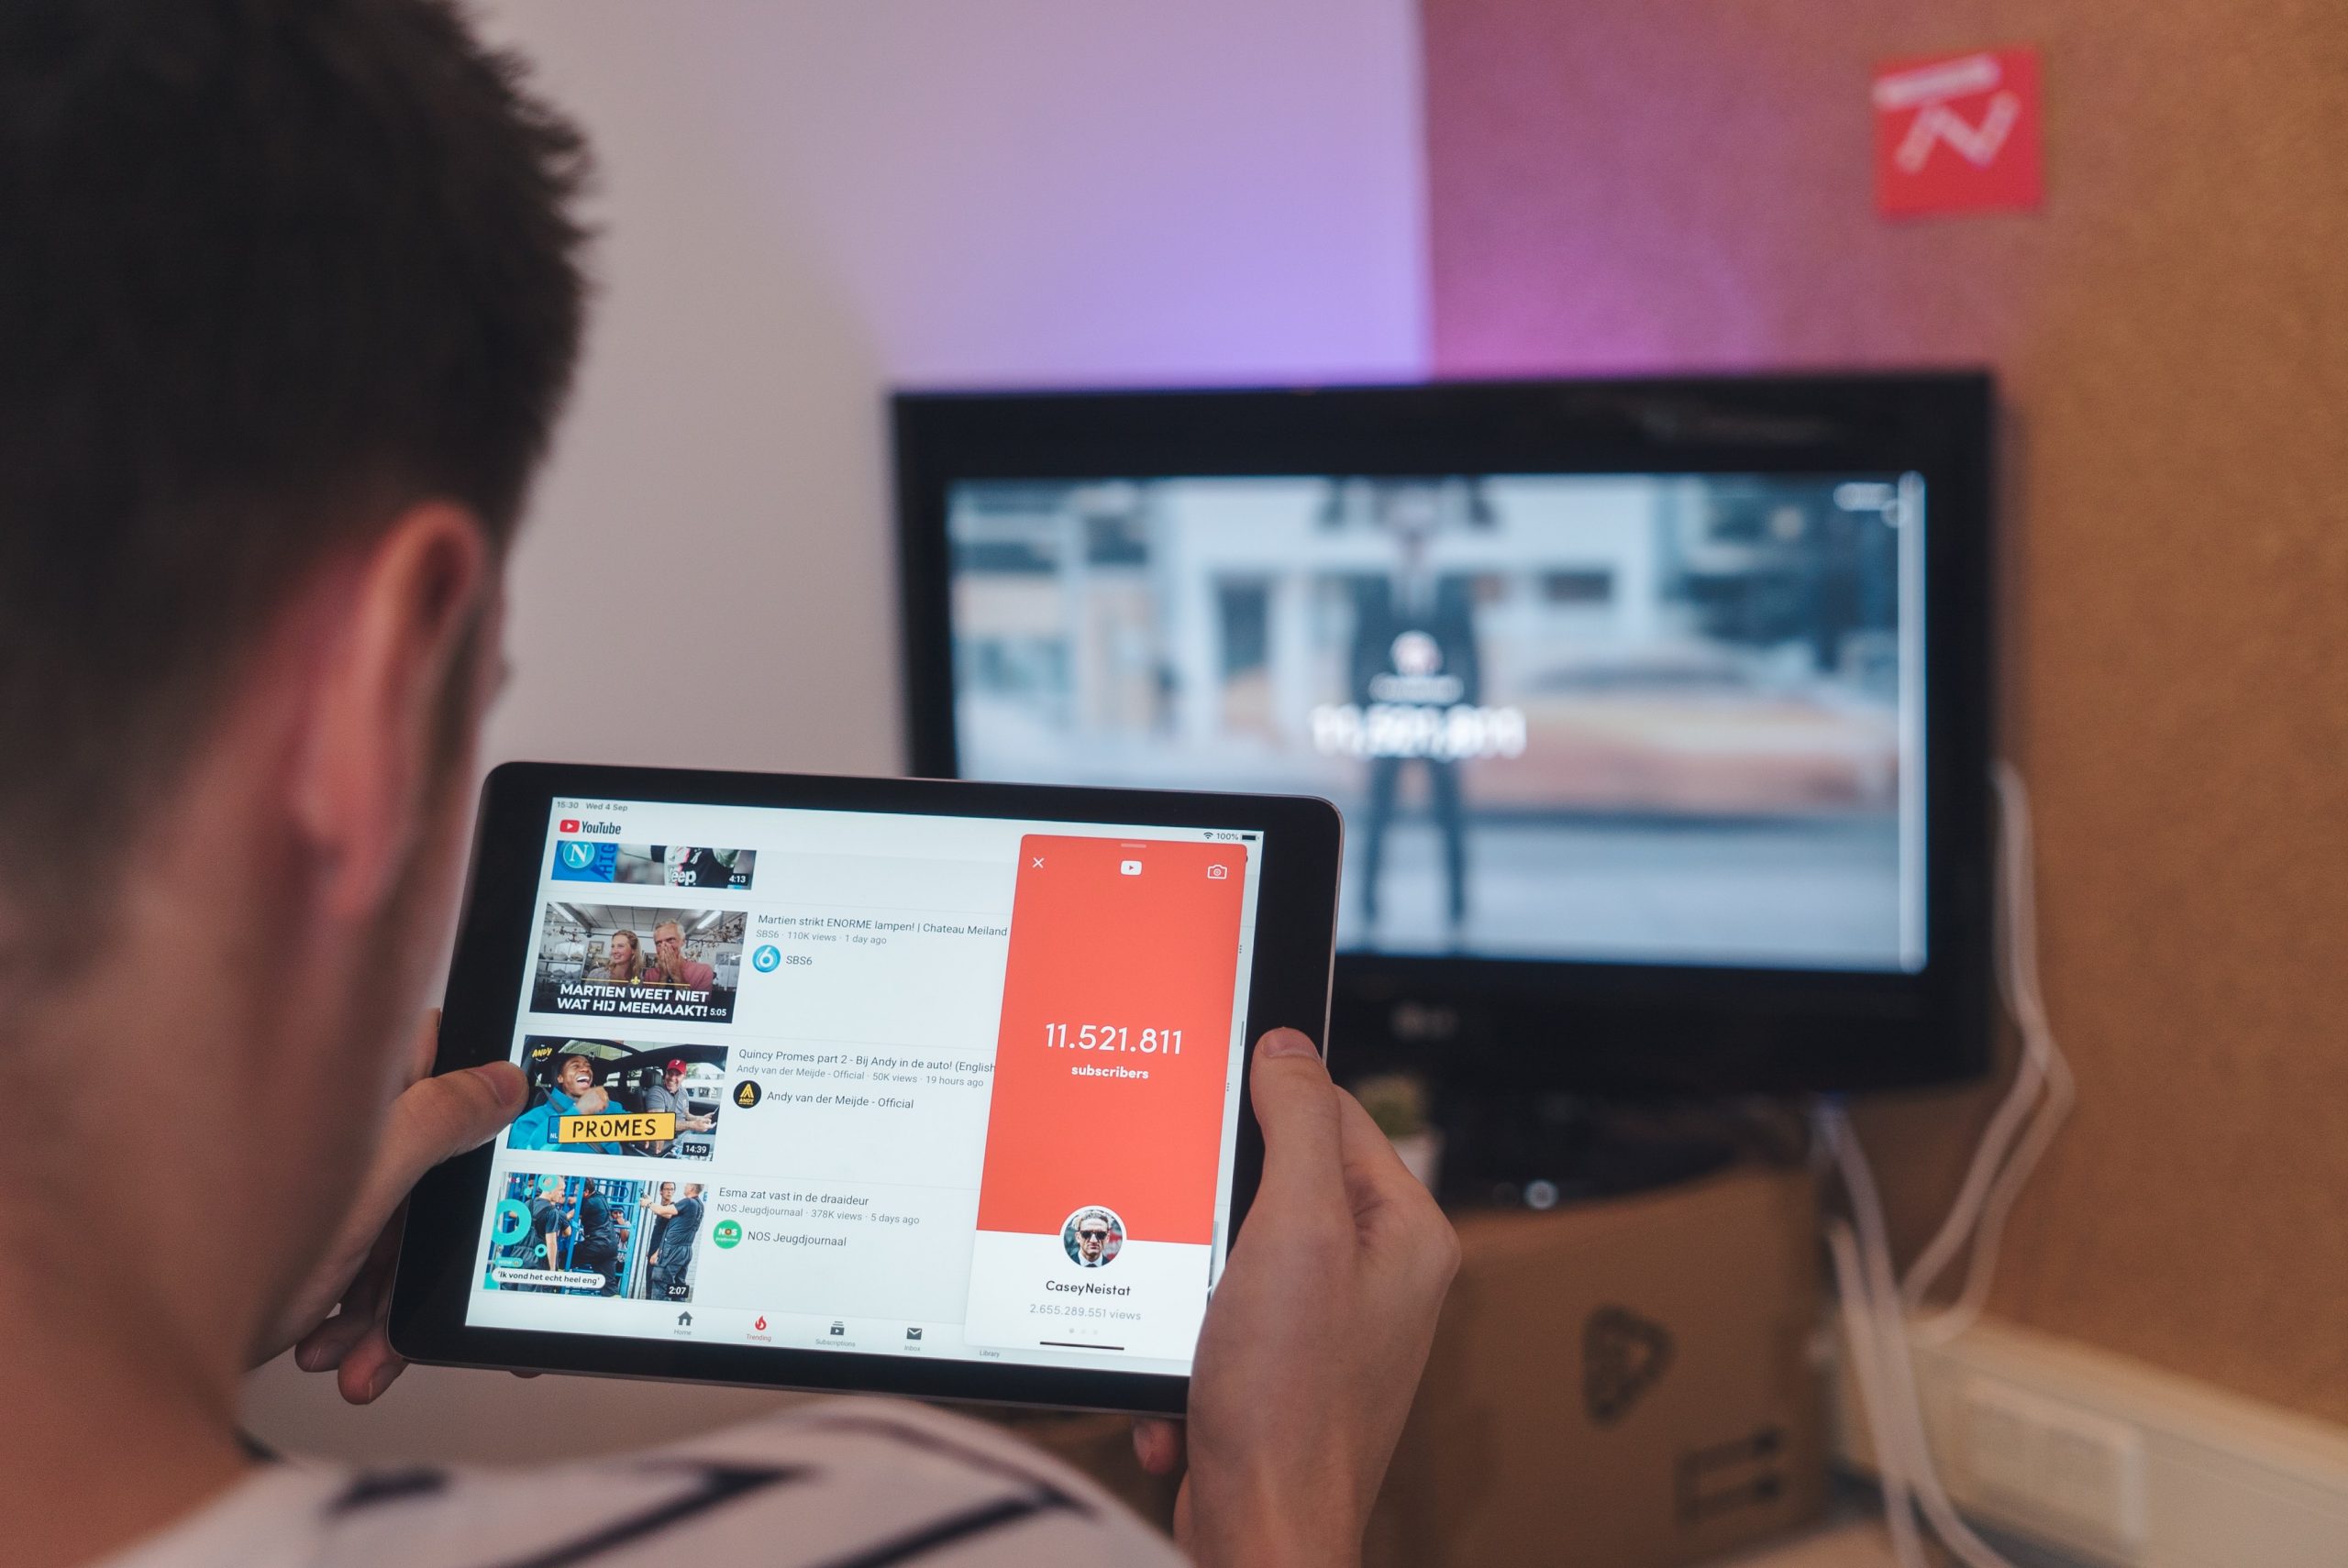 Image shows a man watching YouTube shoppable videos on a tablet